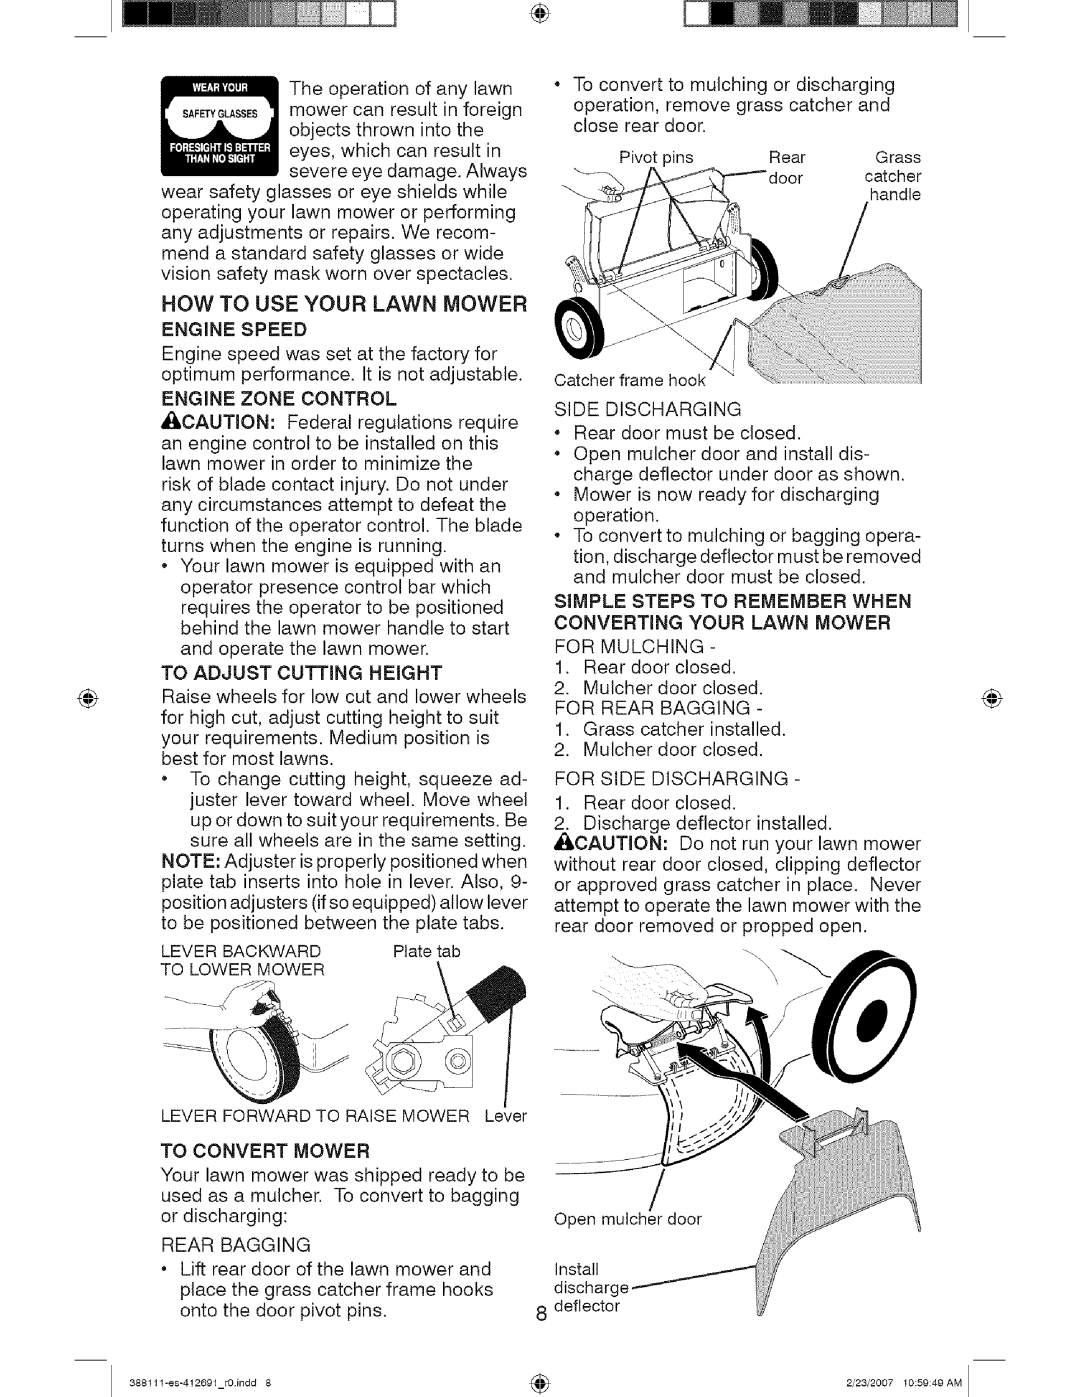 Craftsman 917 388111 owner manual Converting Your Lawn Mower, To Convert Mower 